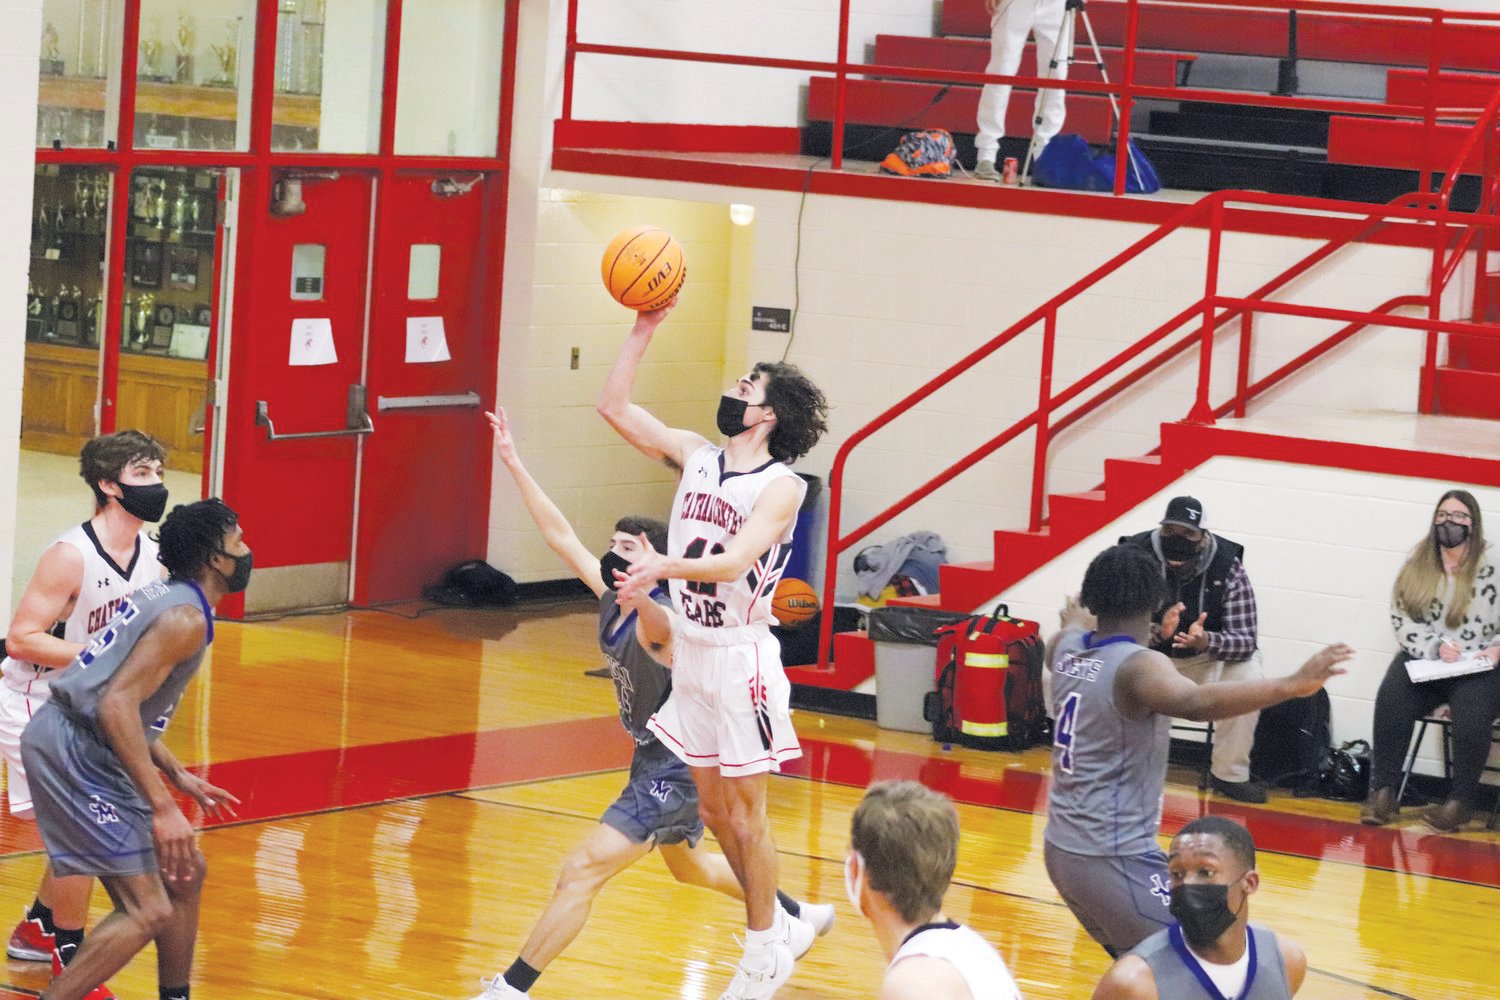 Chatham Central junior guard Colby Williamson (with ball) shoots a floater in his team's 60-59 win over Jordan-Matthews last season. Williamson was one of five players who fouled out in the rivalry game.